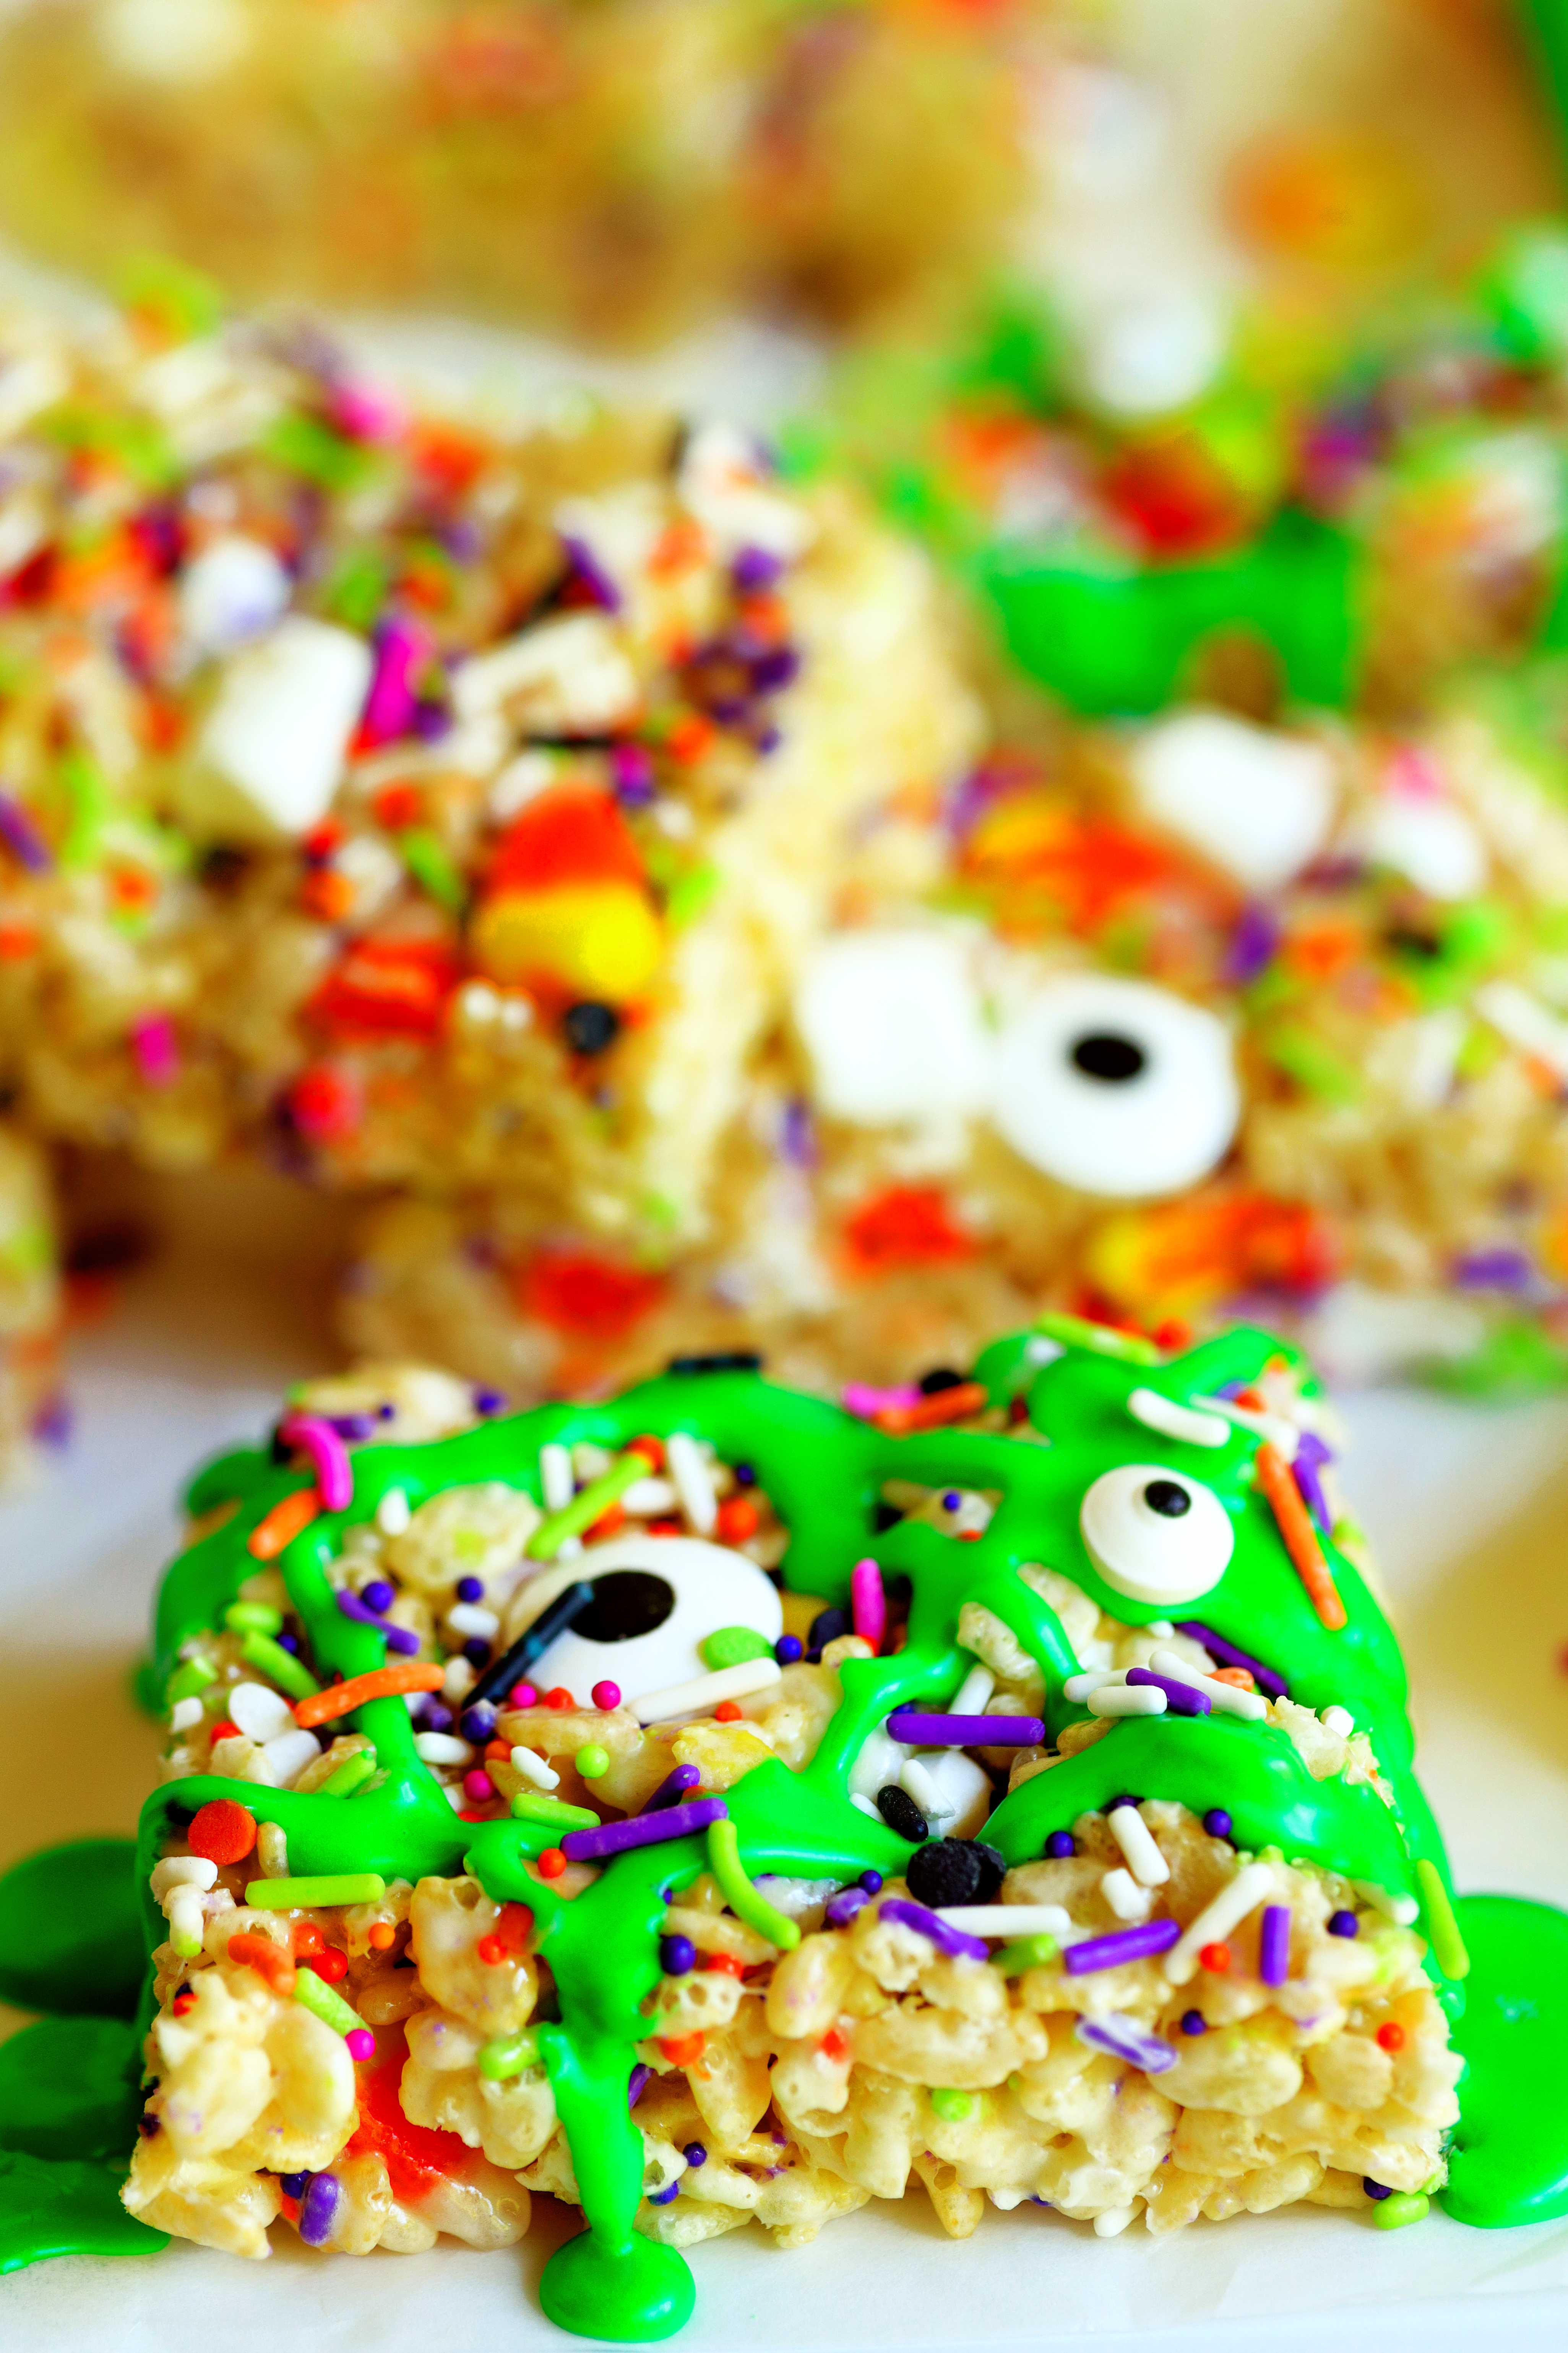 Rice krispie treat covered in green icing to look like slime, topped with multi-colored sprinkles. Two black-and-white eyeballs--different sizes--size on top of the green icing.